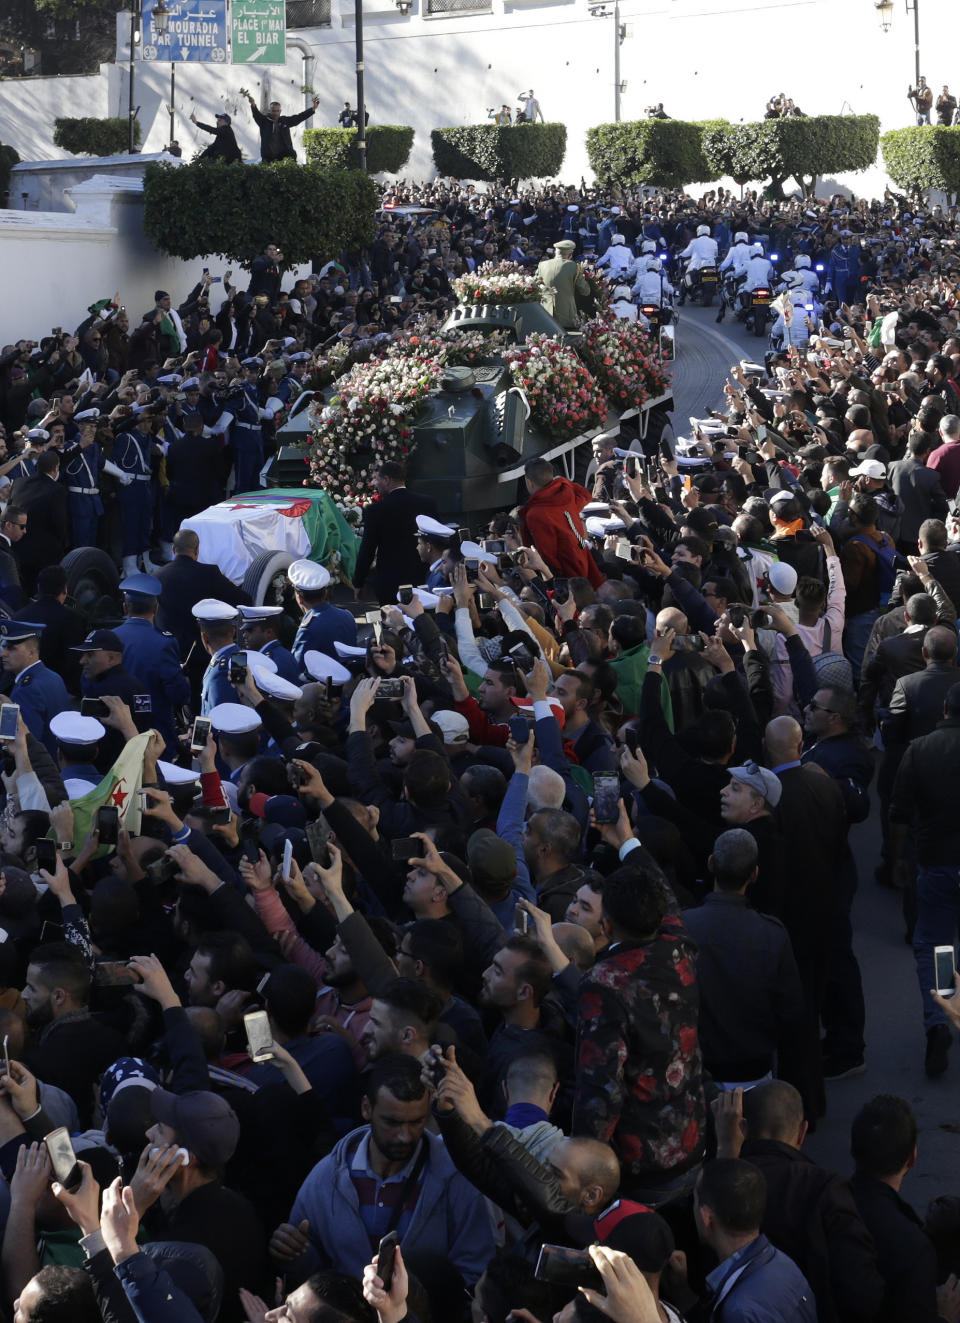 People gather during the funeral Gen. Ahmed Gaid Salah, in Algiers, Algeria, Wednesday, Dec. 25, 2019. Algeria is holding an elaborate military funeral for the general who was the de facto ruler of the gas-rich country amid political turmoil throughout this year. (AP Photo/Toufik Doudou)